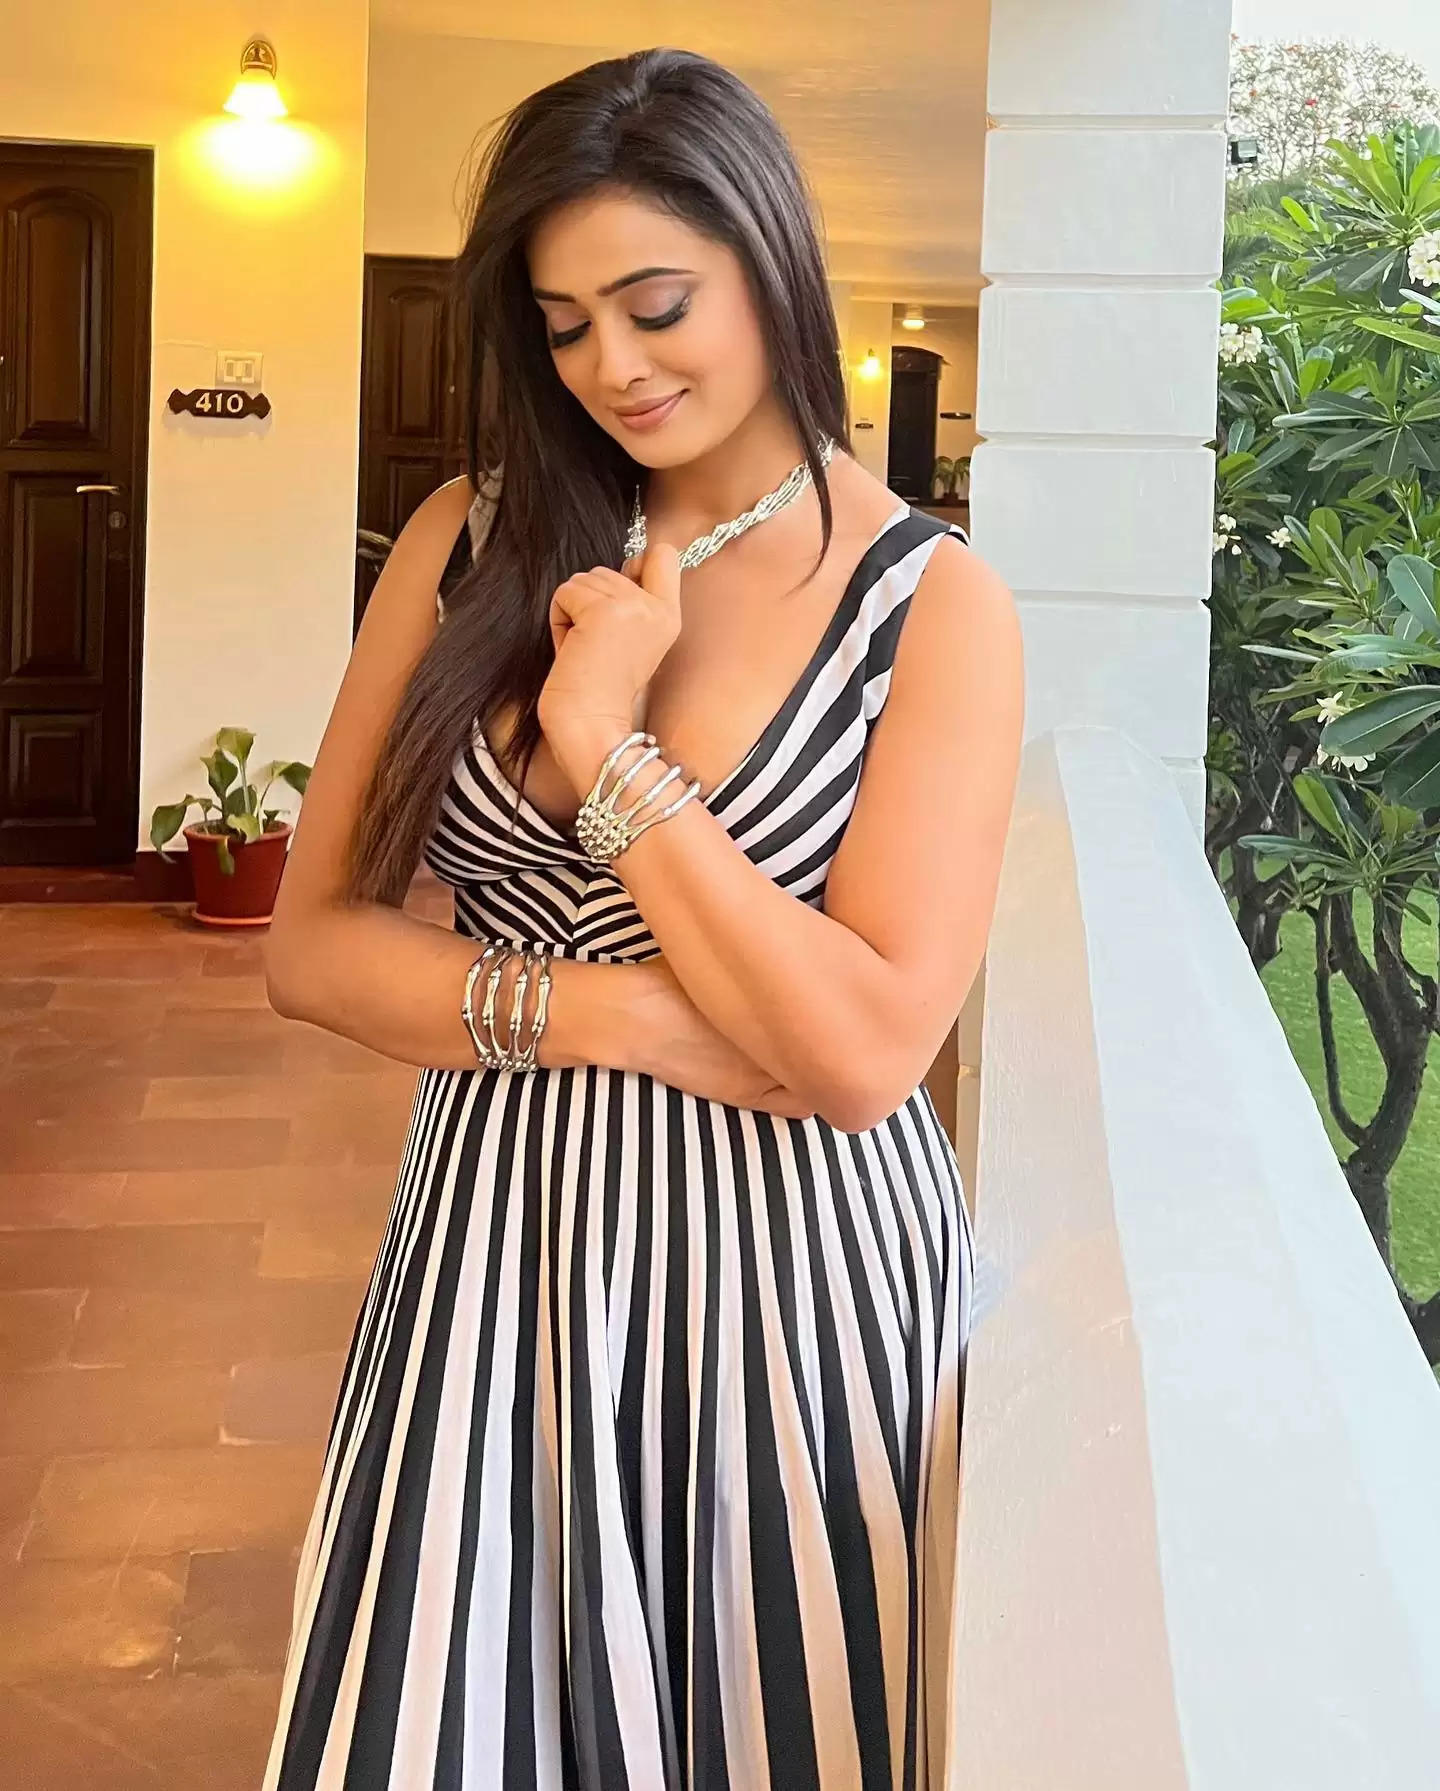 Shweta Tiwari got her bold photoshoot done wearing a black and white gown, see viral photos